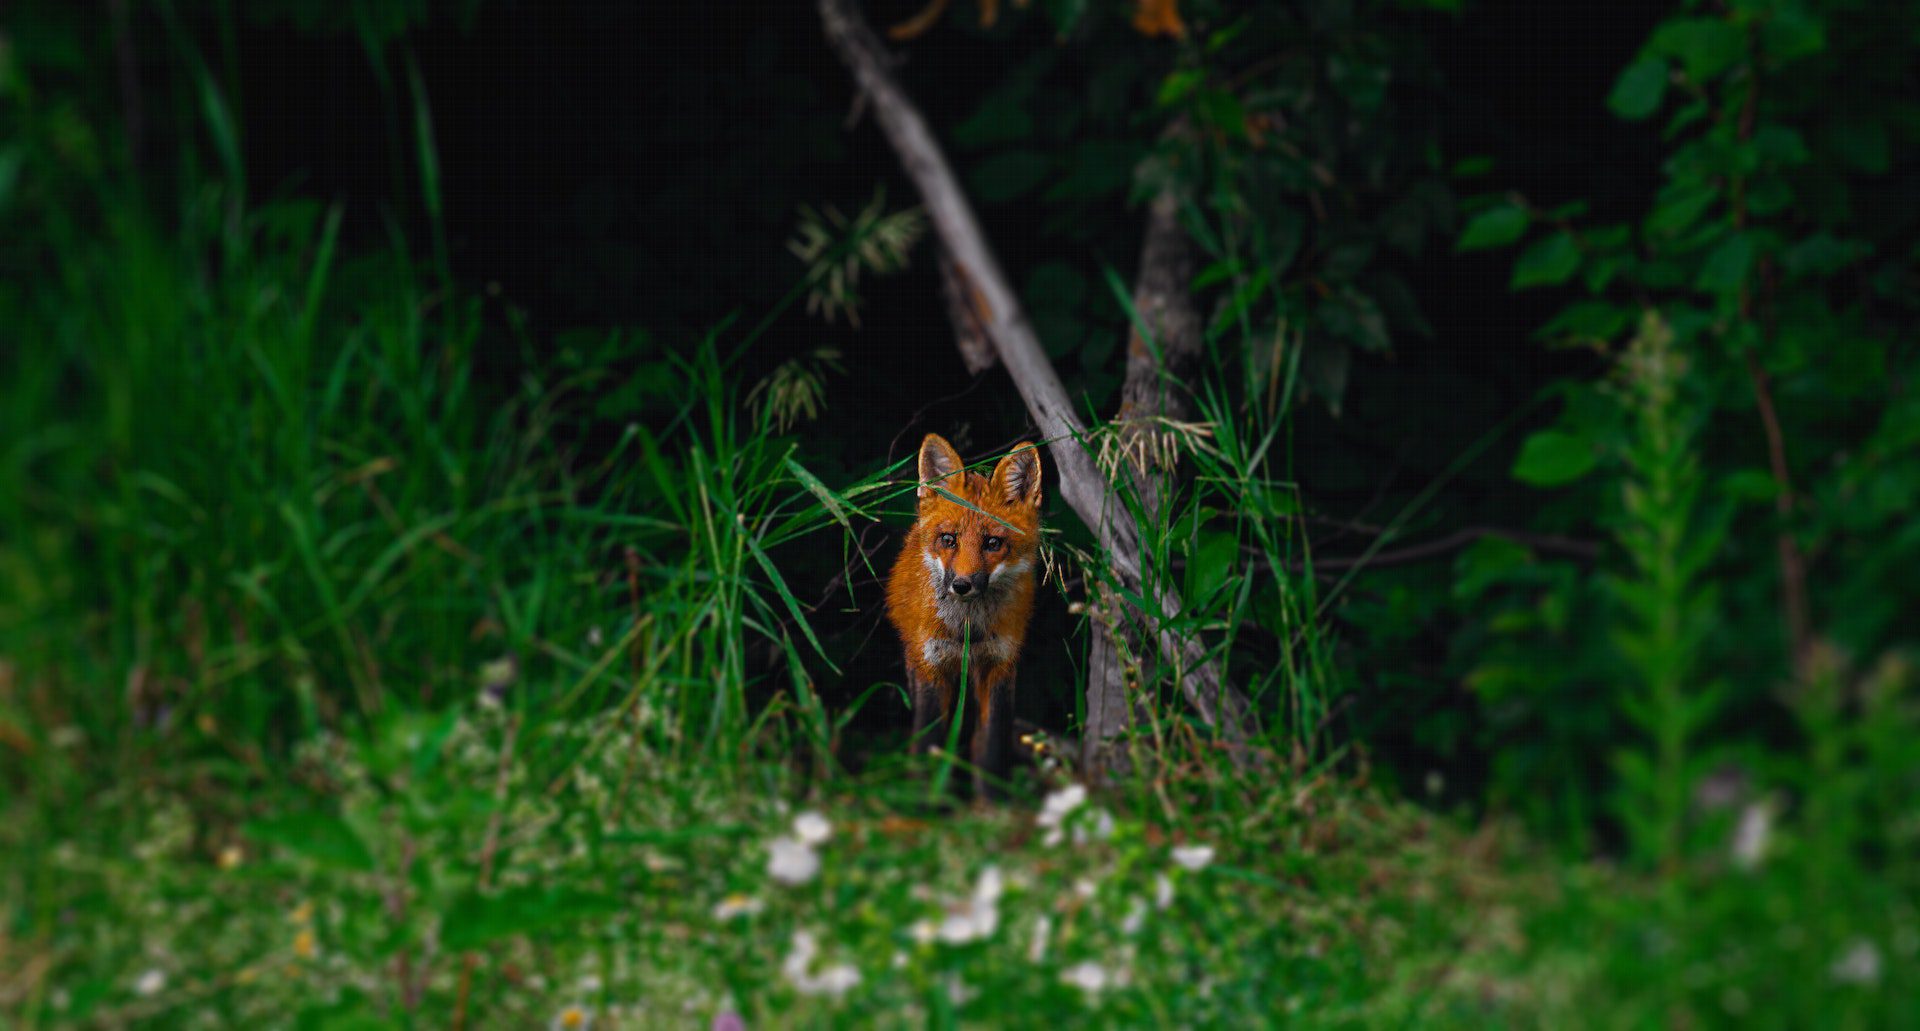 A fox standing at the edge of the forest.